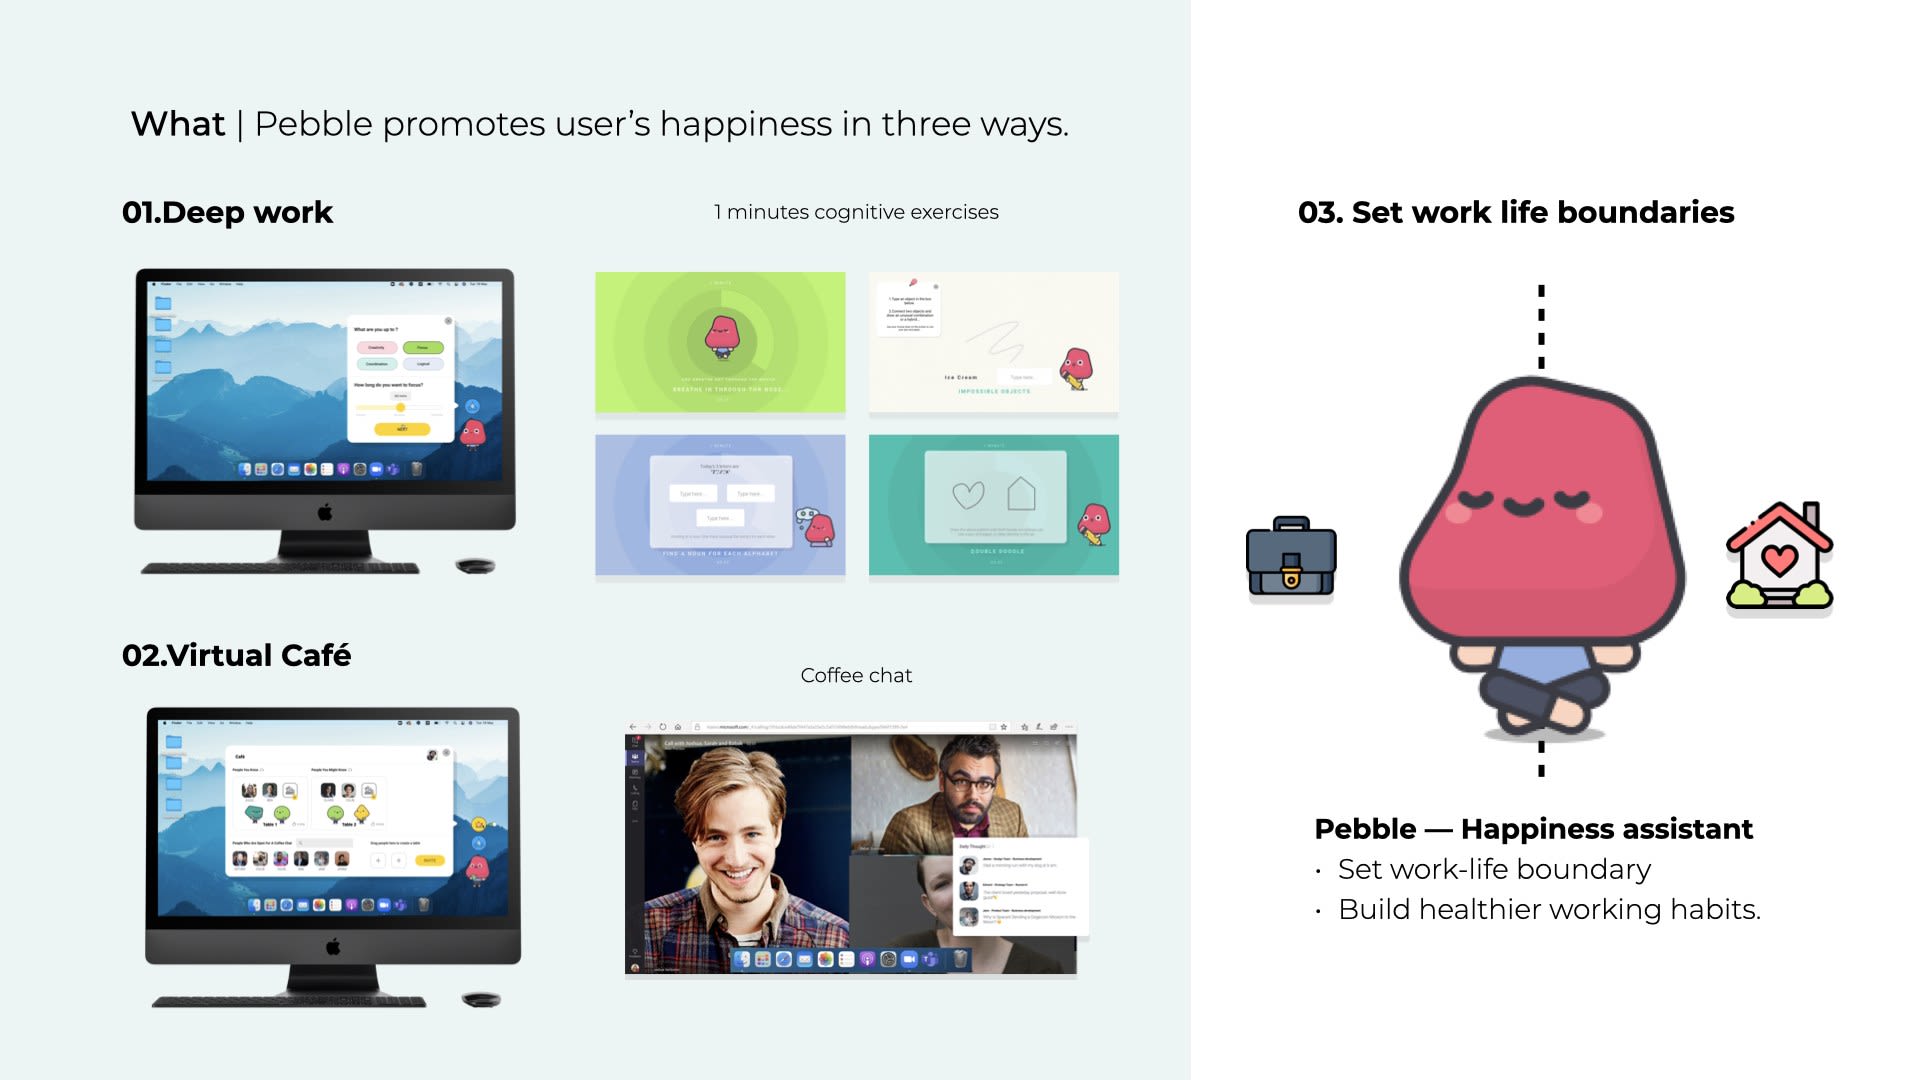 Pebble promotes remote worker’s happiness in three ways. 